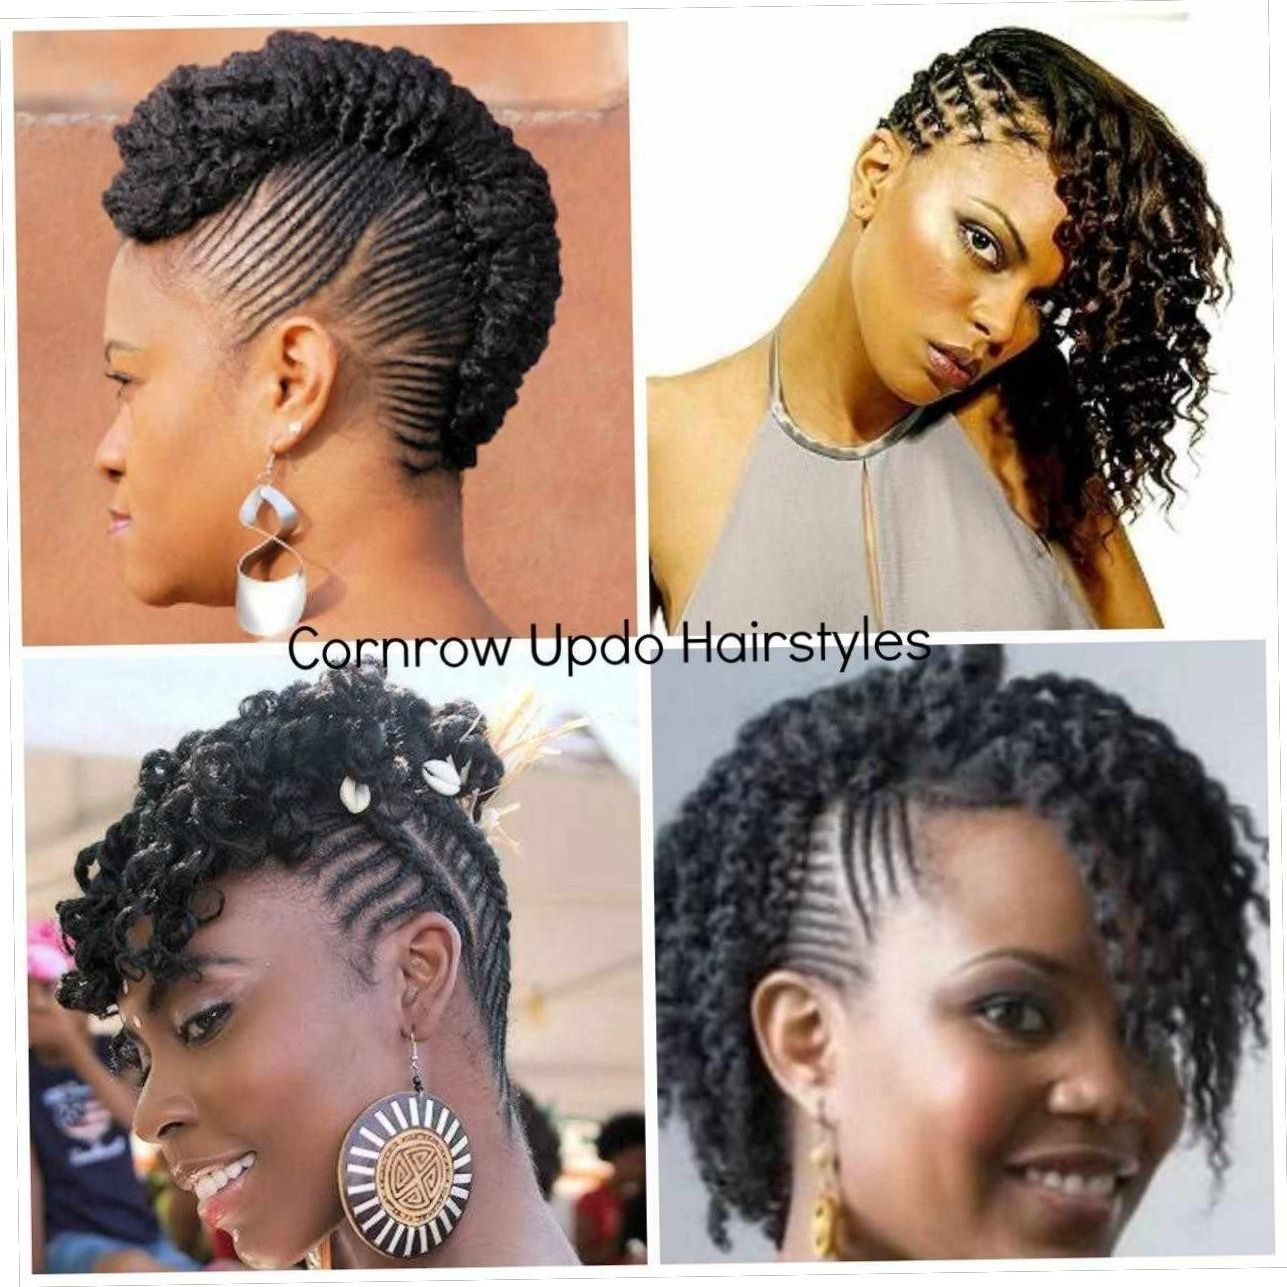 Most Popular Cornrows Hairstyles For Round Faces Intended For 18+ Cute Cornrow Hairstyles For Fat Faces 2018 – Straightuphairstyle (View 5 of 15)